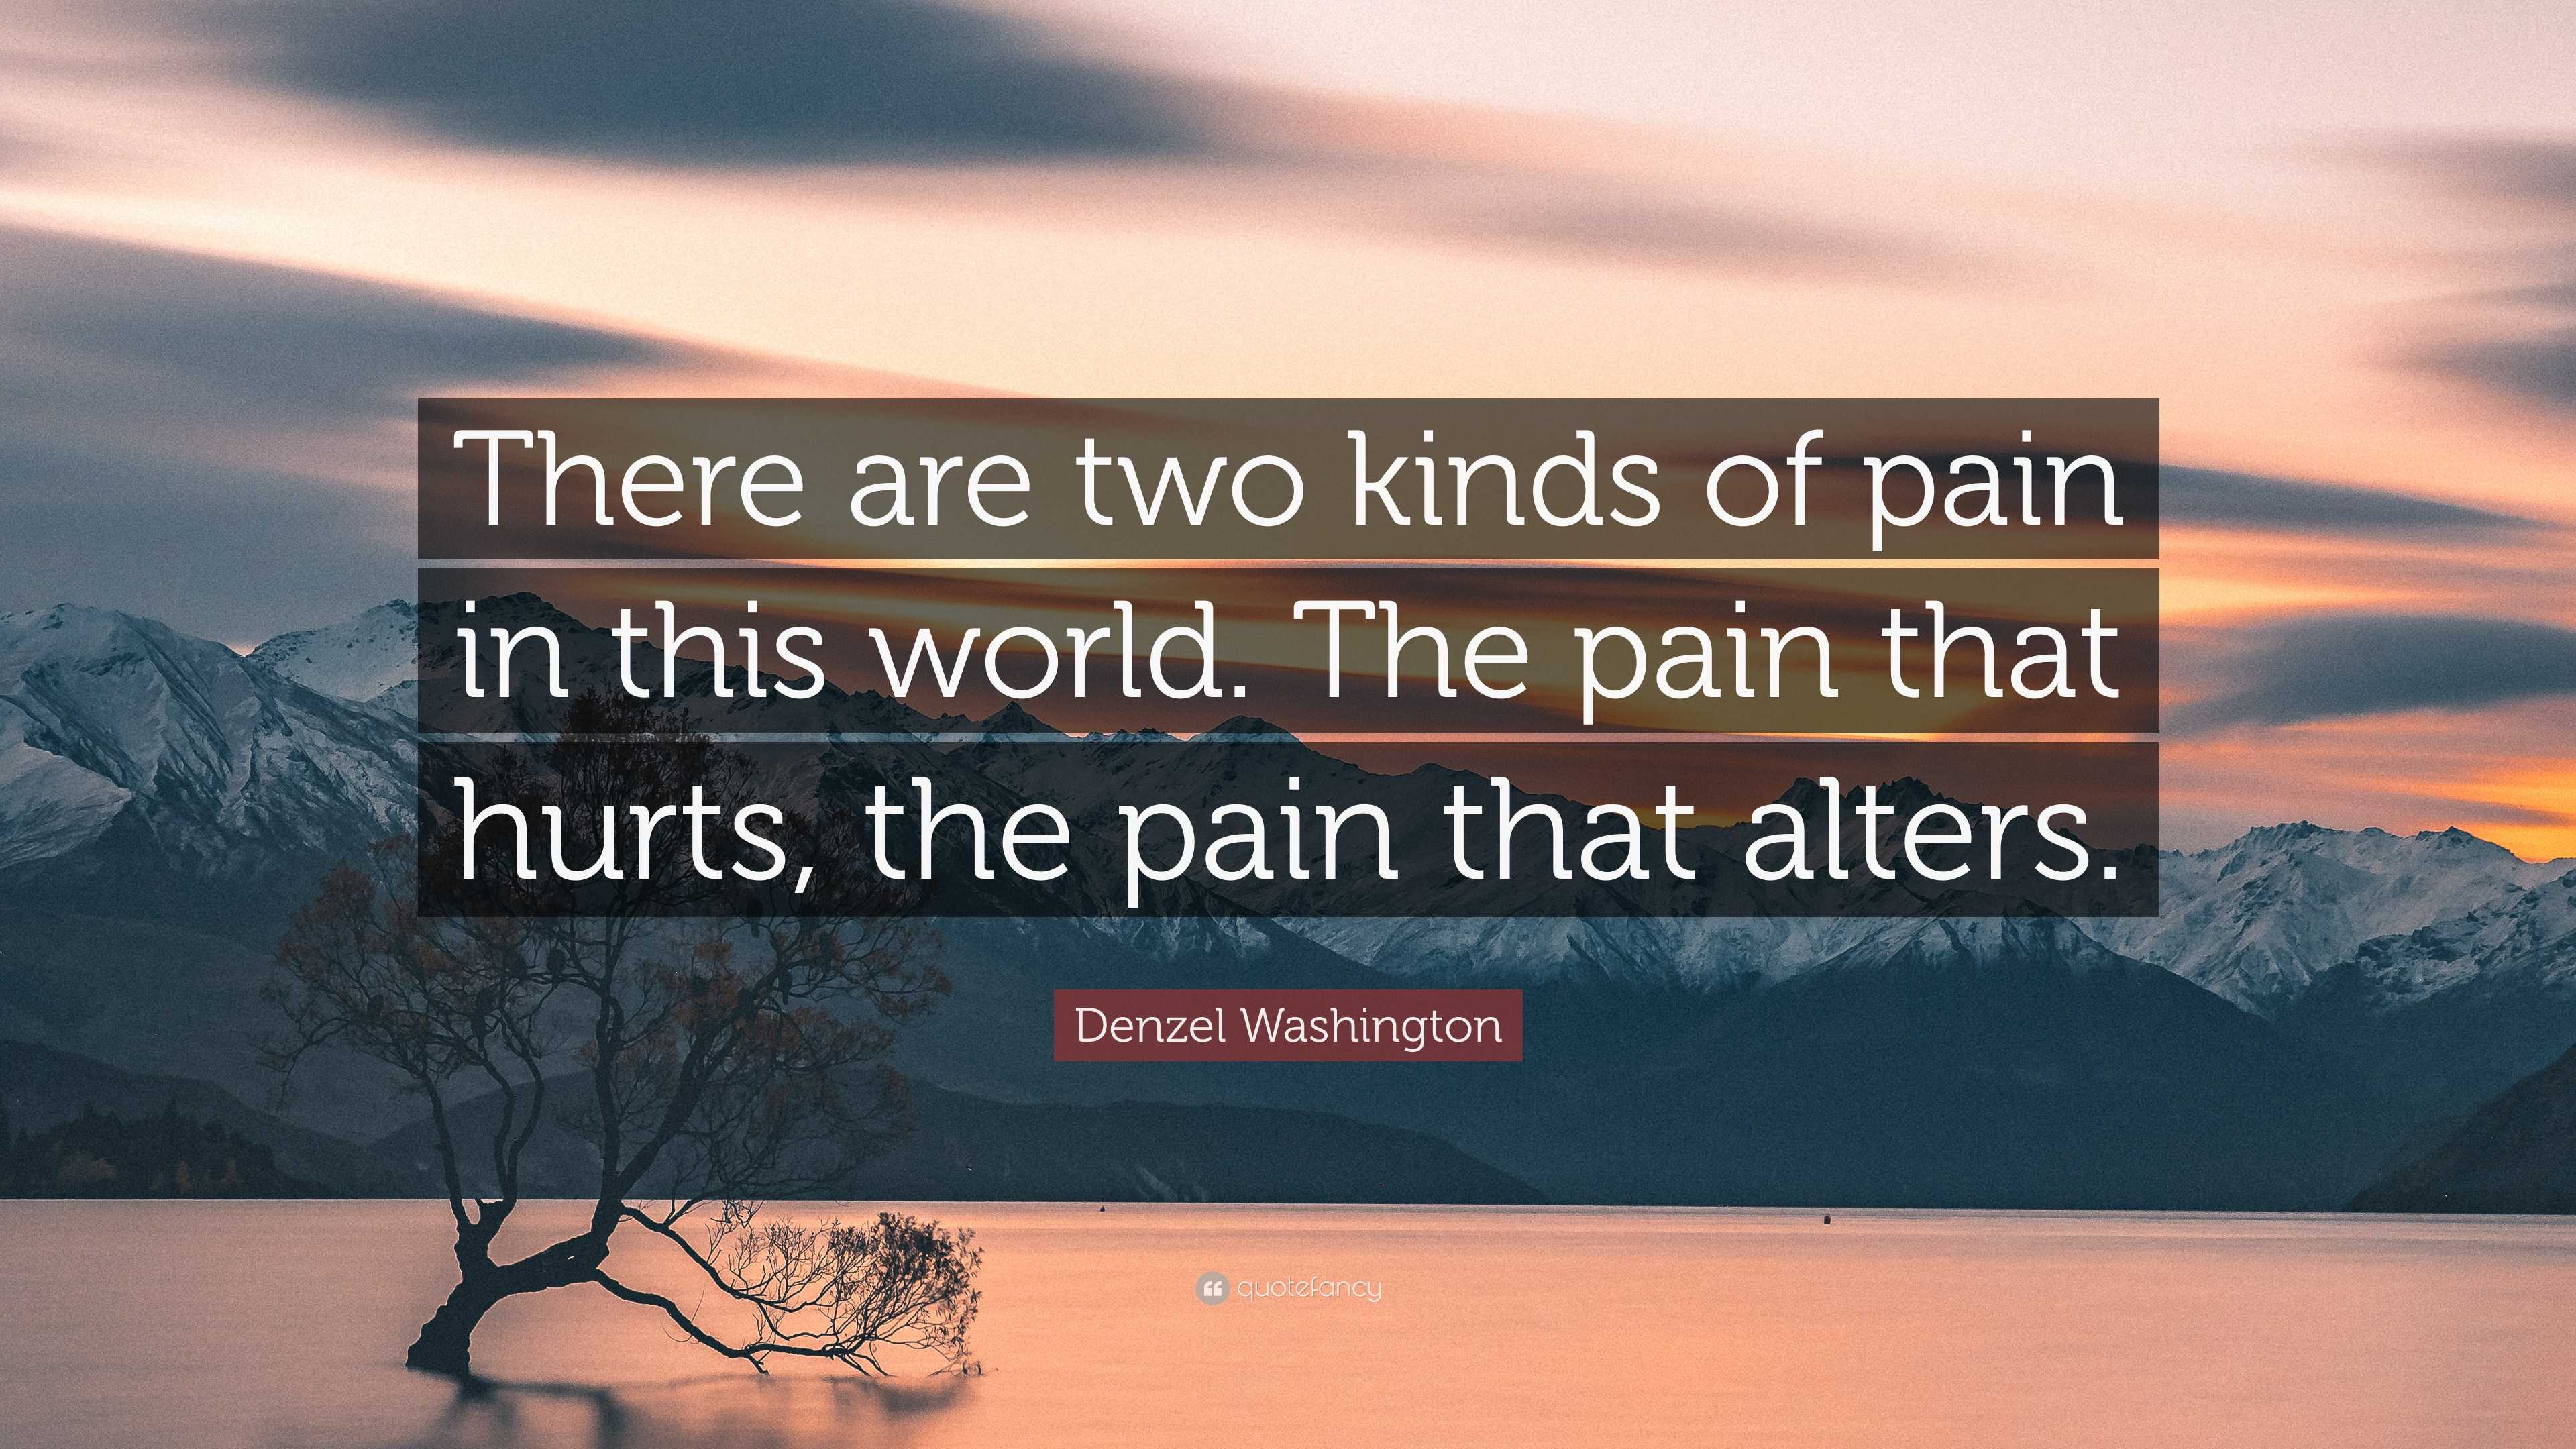 Denzel Washington Quote: “There are two kinds of pain in this world ...